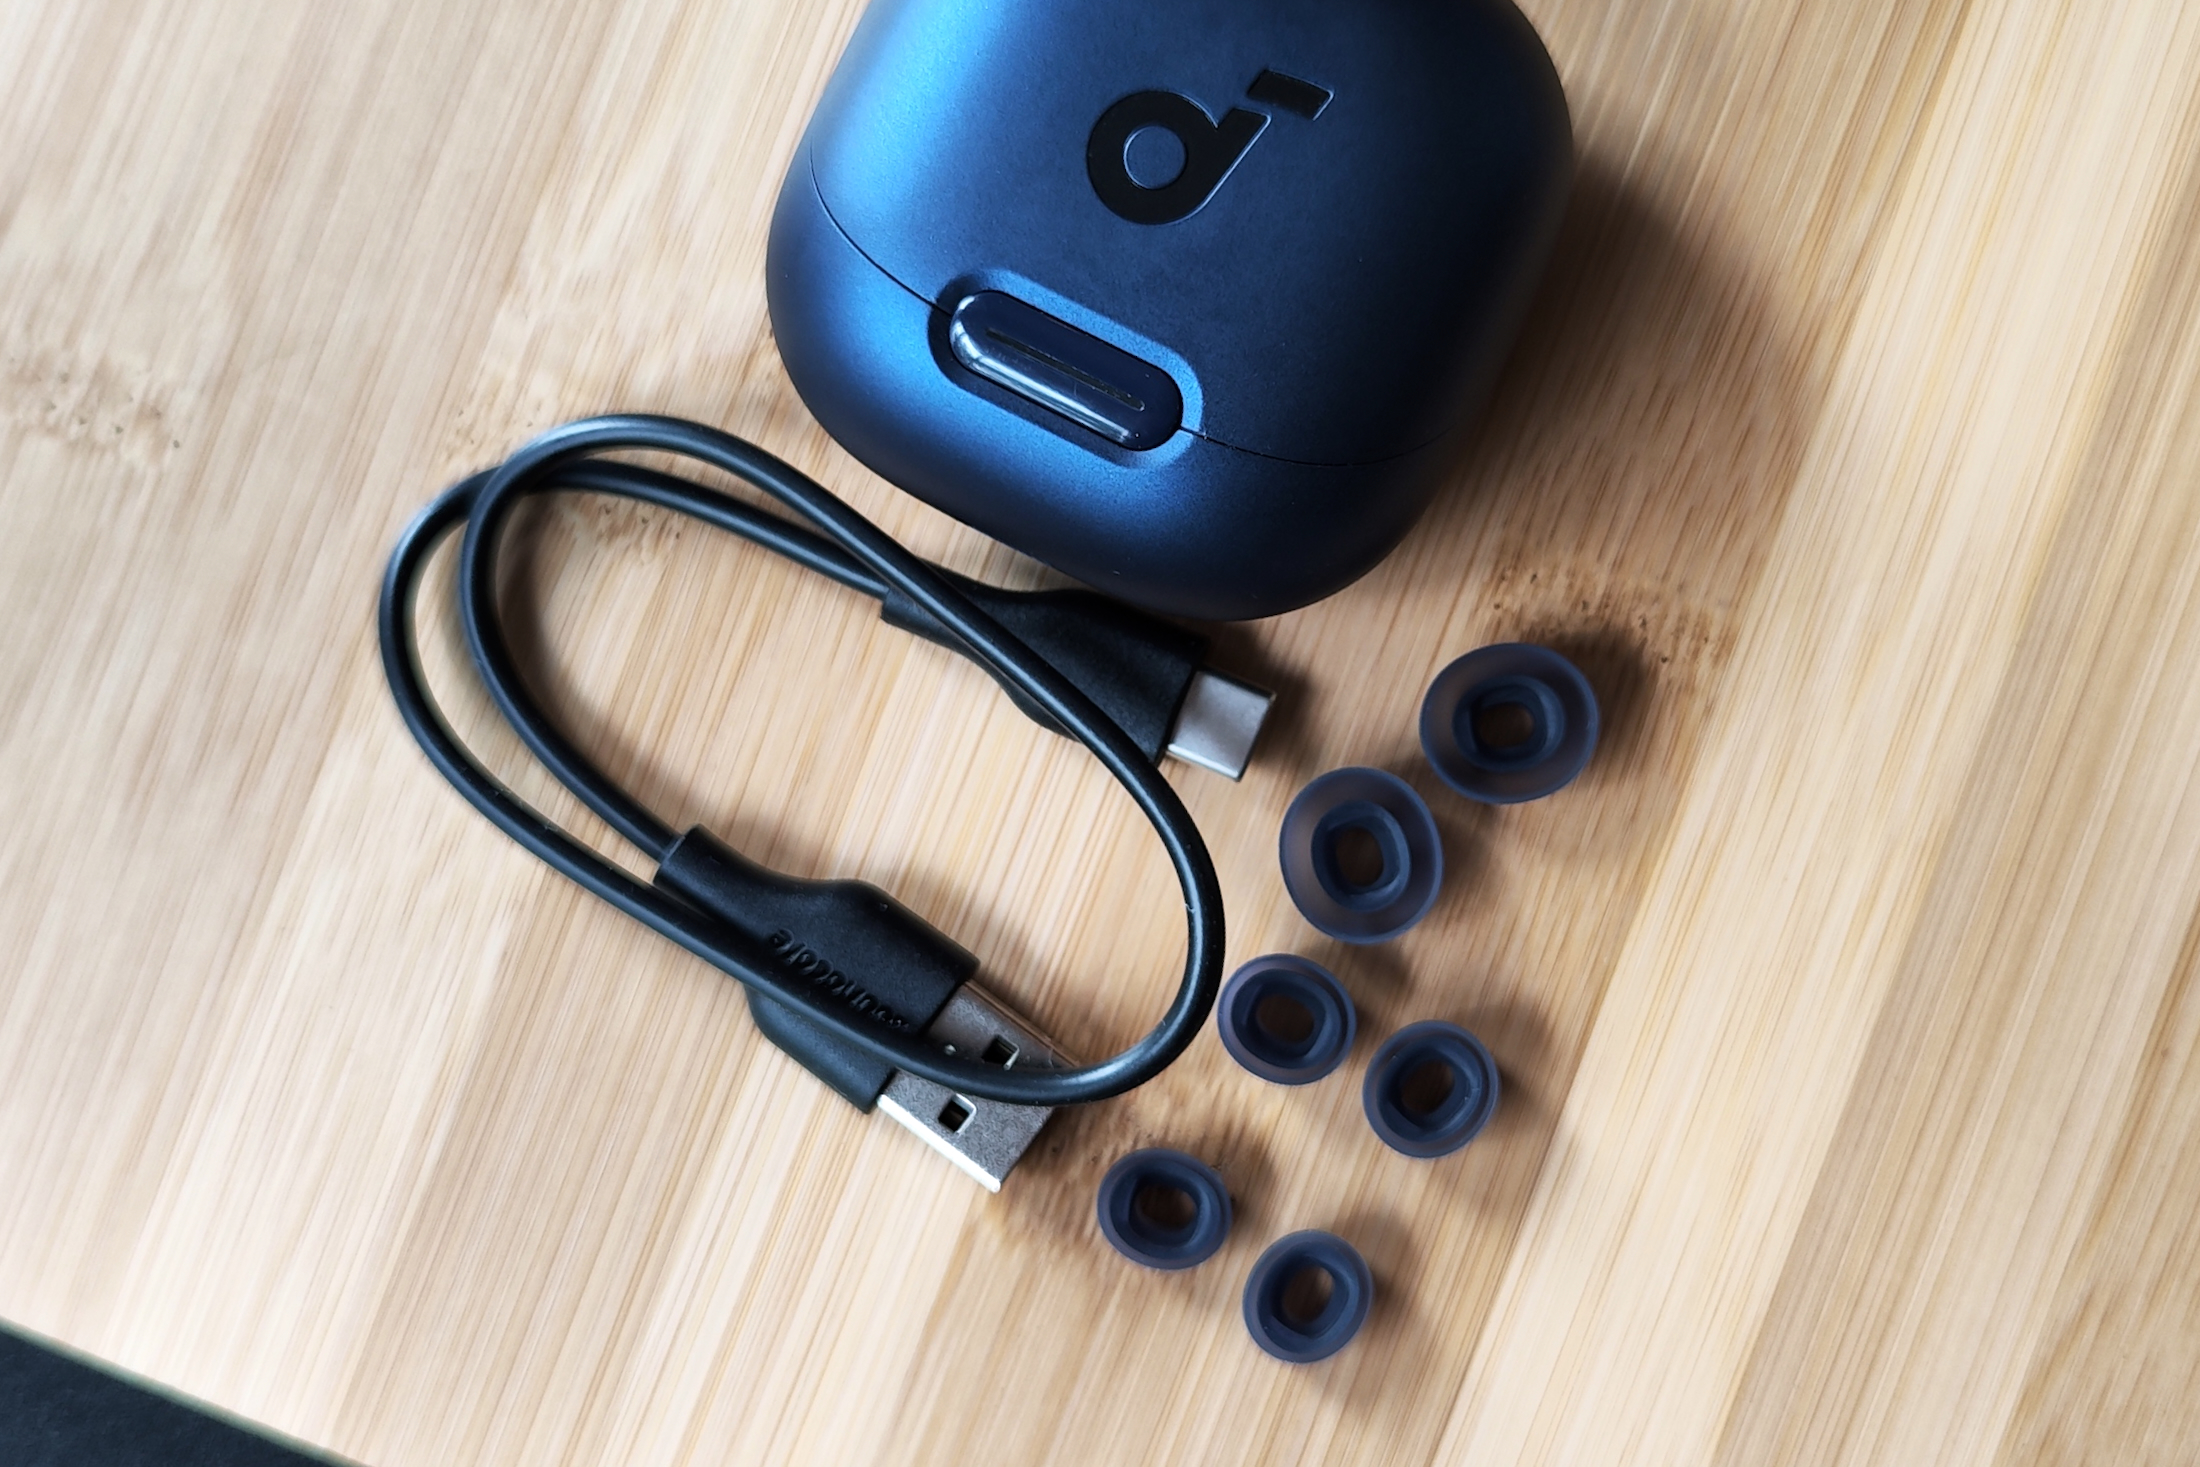 Anker Soundcore Liberty 4 NC Review: Masterful Budget Noise-Canceling Buds